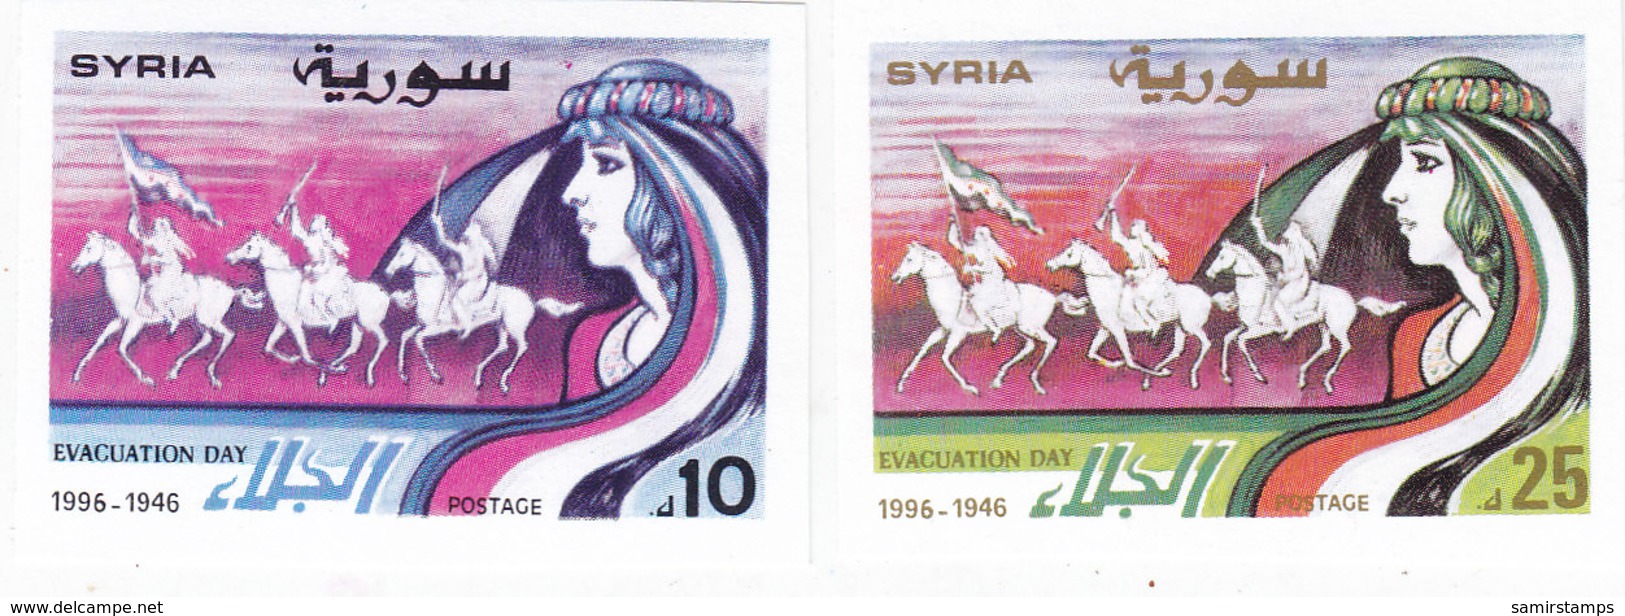 Syria Evacuation 1996 2 Stamps Compl.set IMPERFORATED,only 50 Exist -MNH- Reduced Price- SKRILL PAY ONLY - Syria